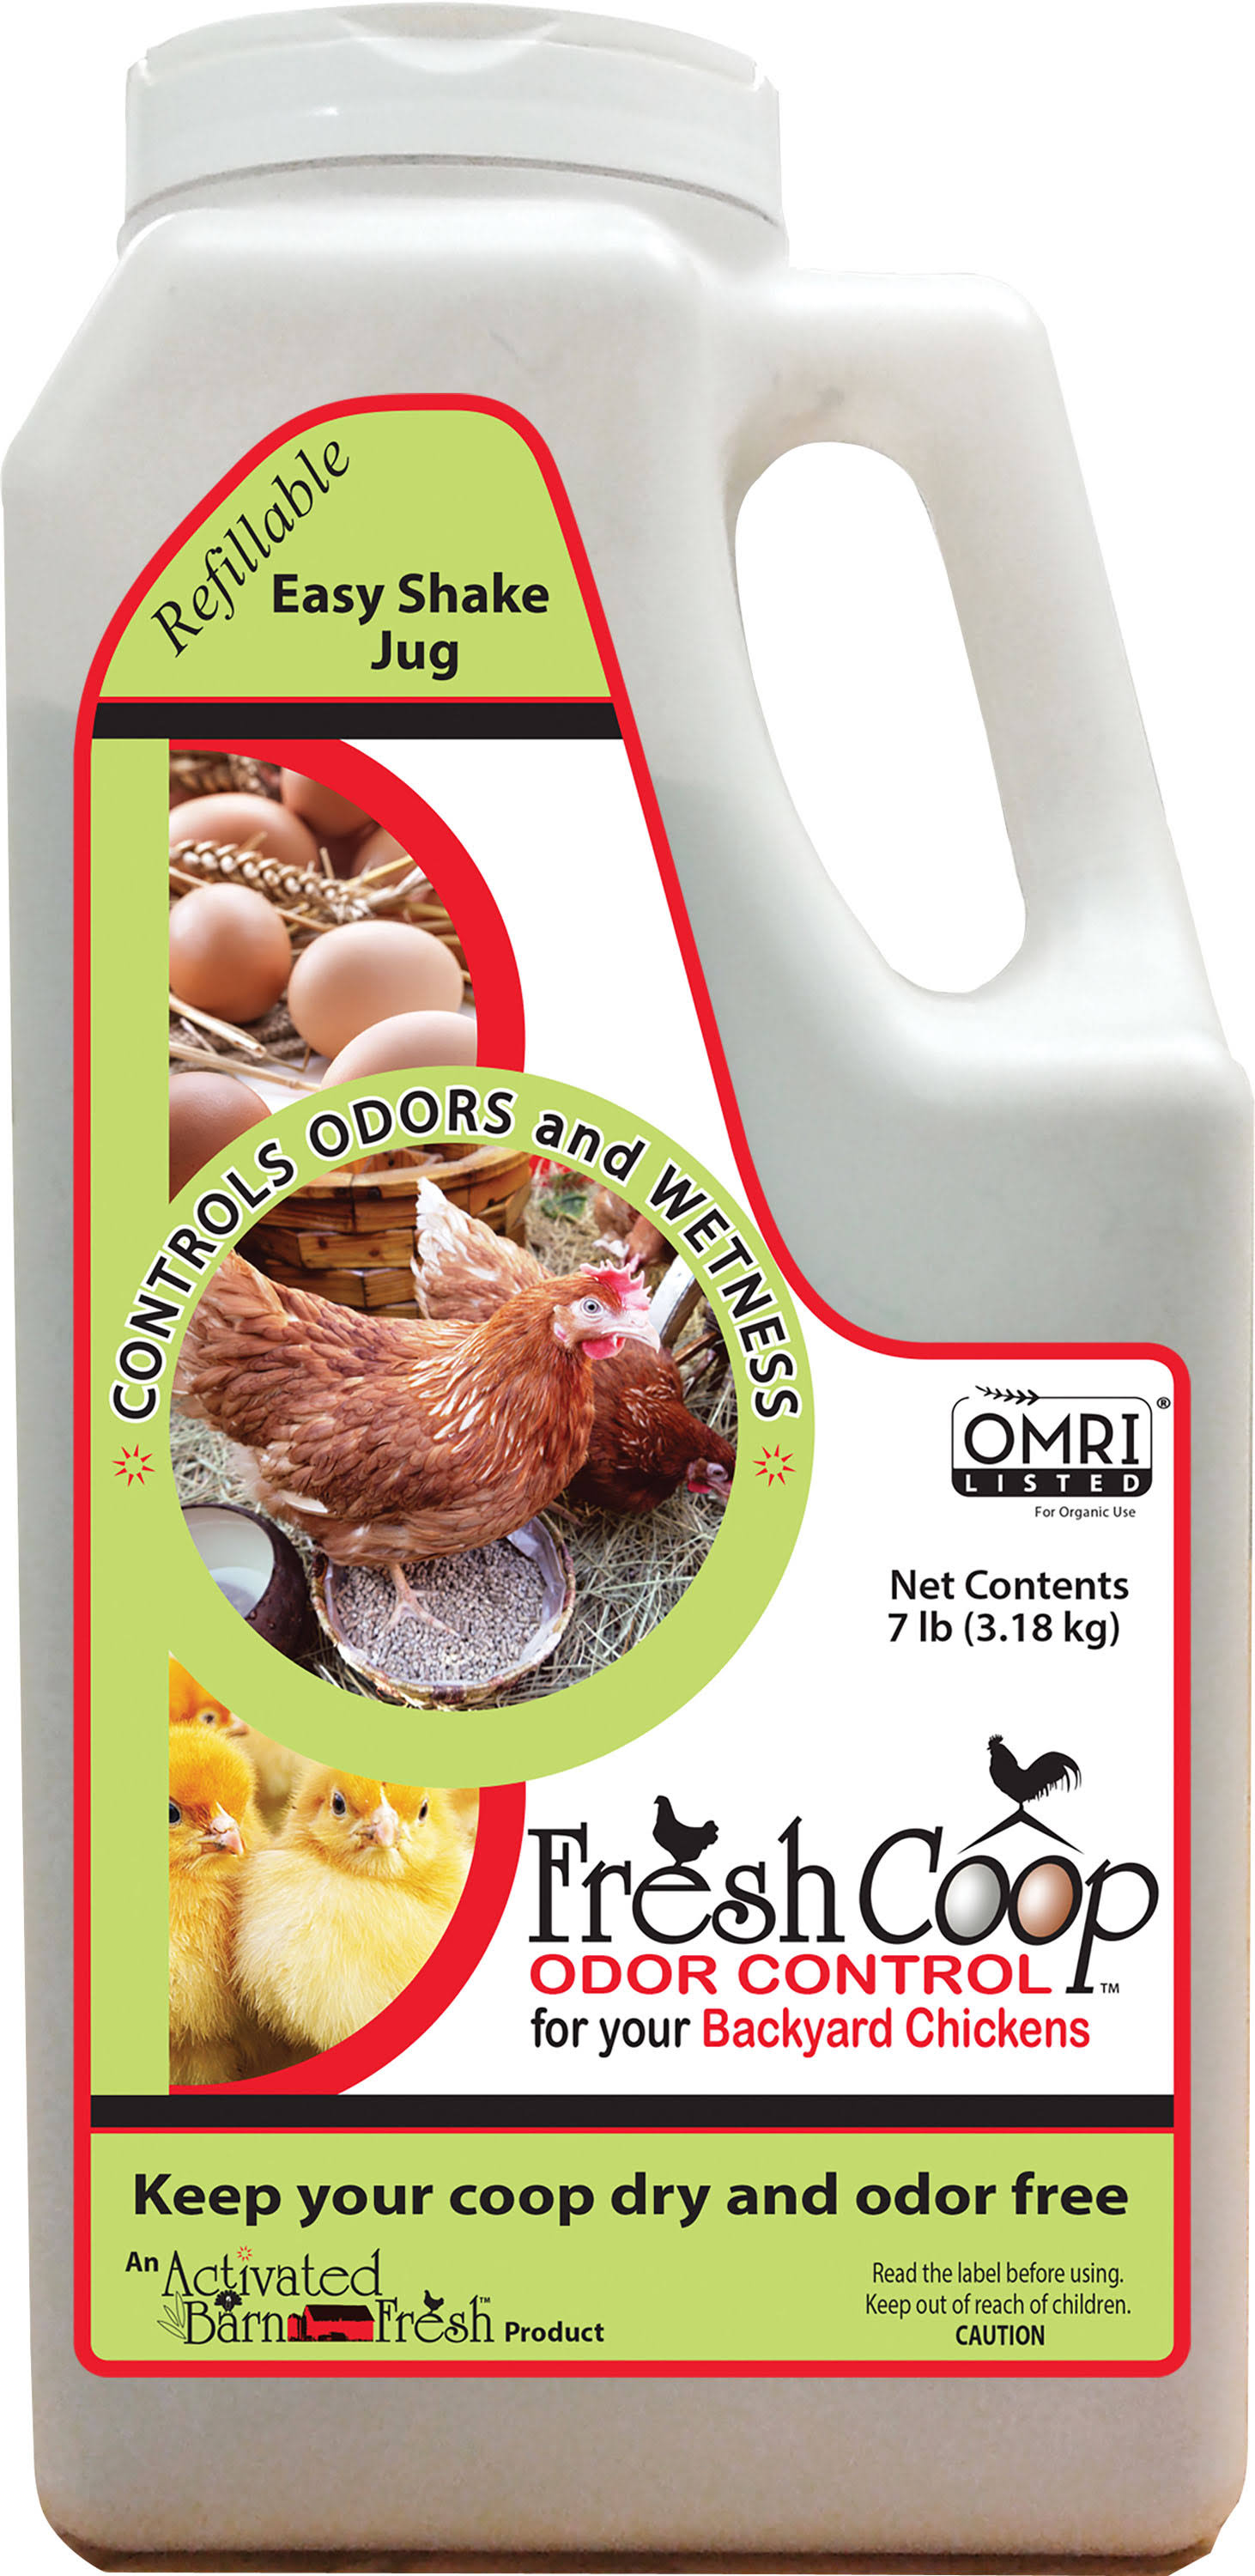 Absorbent Products Fresh Coop Odor Control - Backyard Chickens, 7lbs